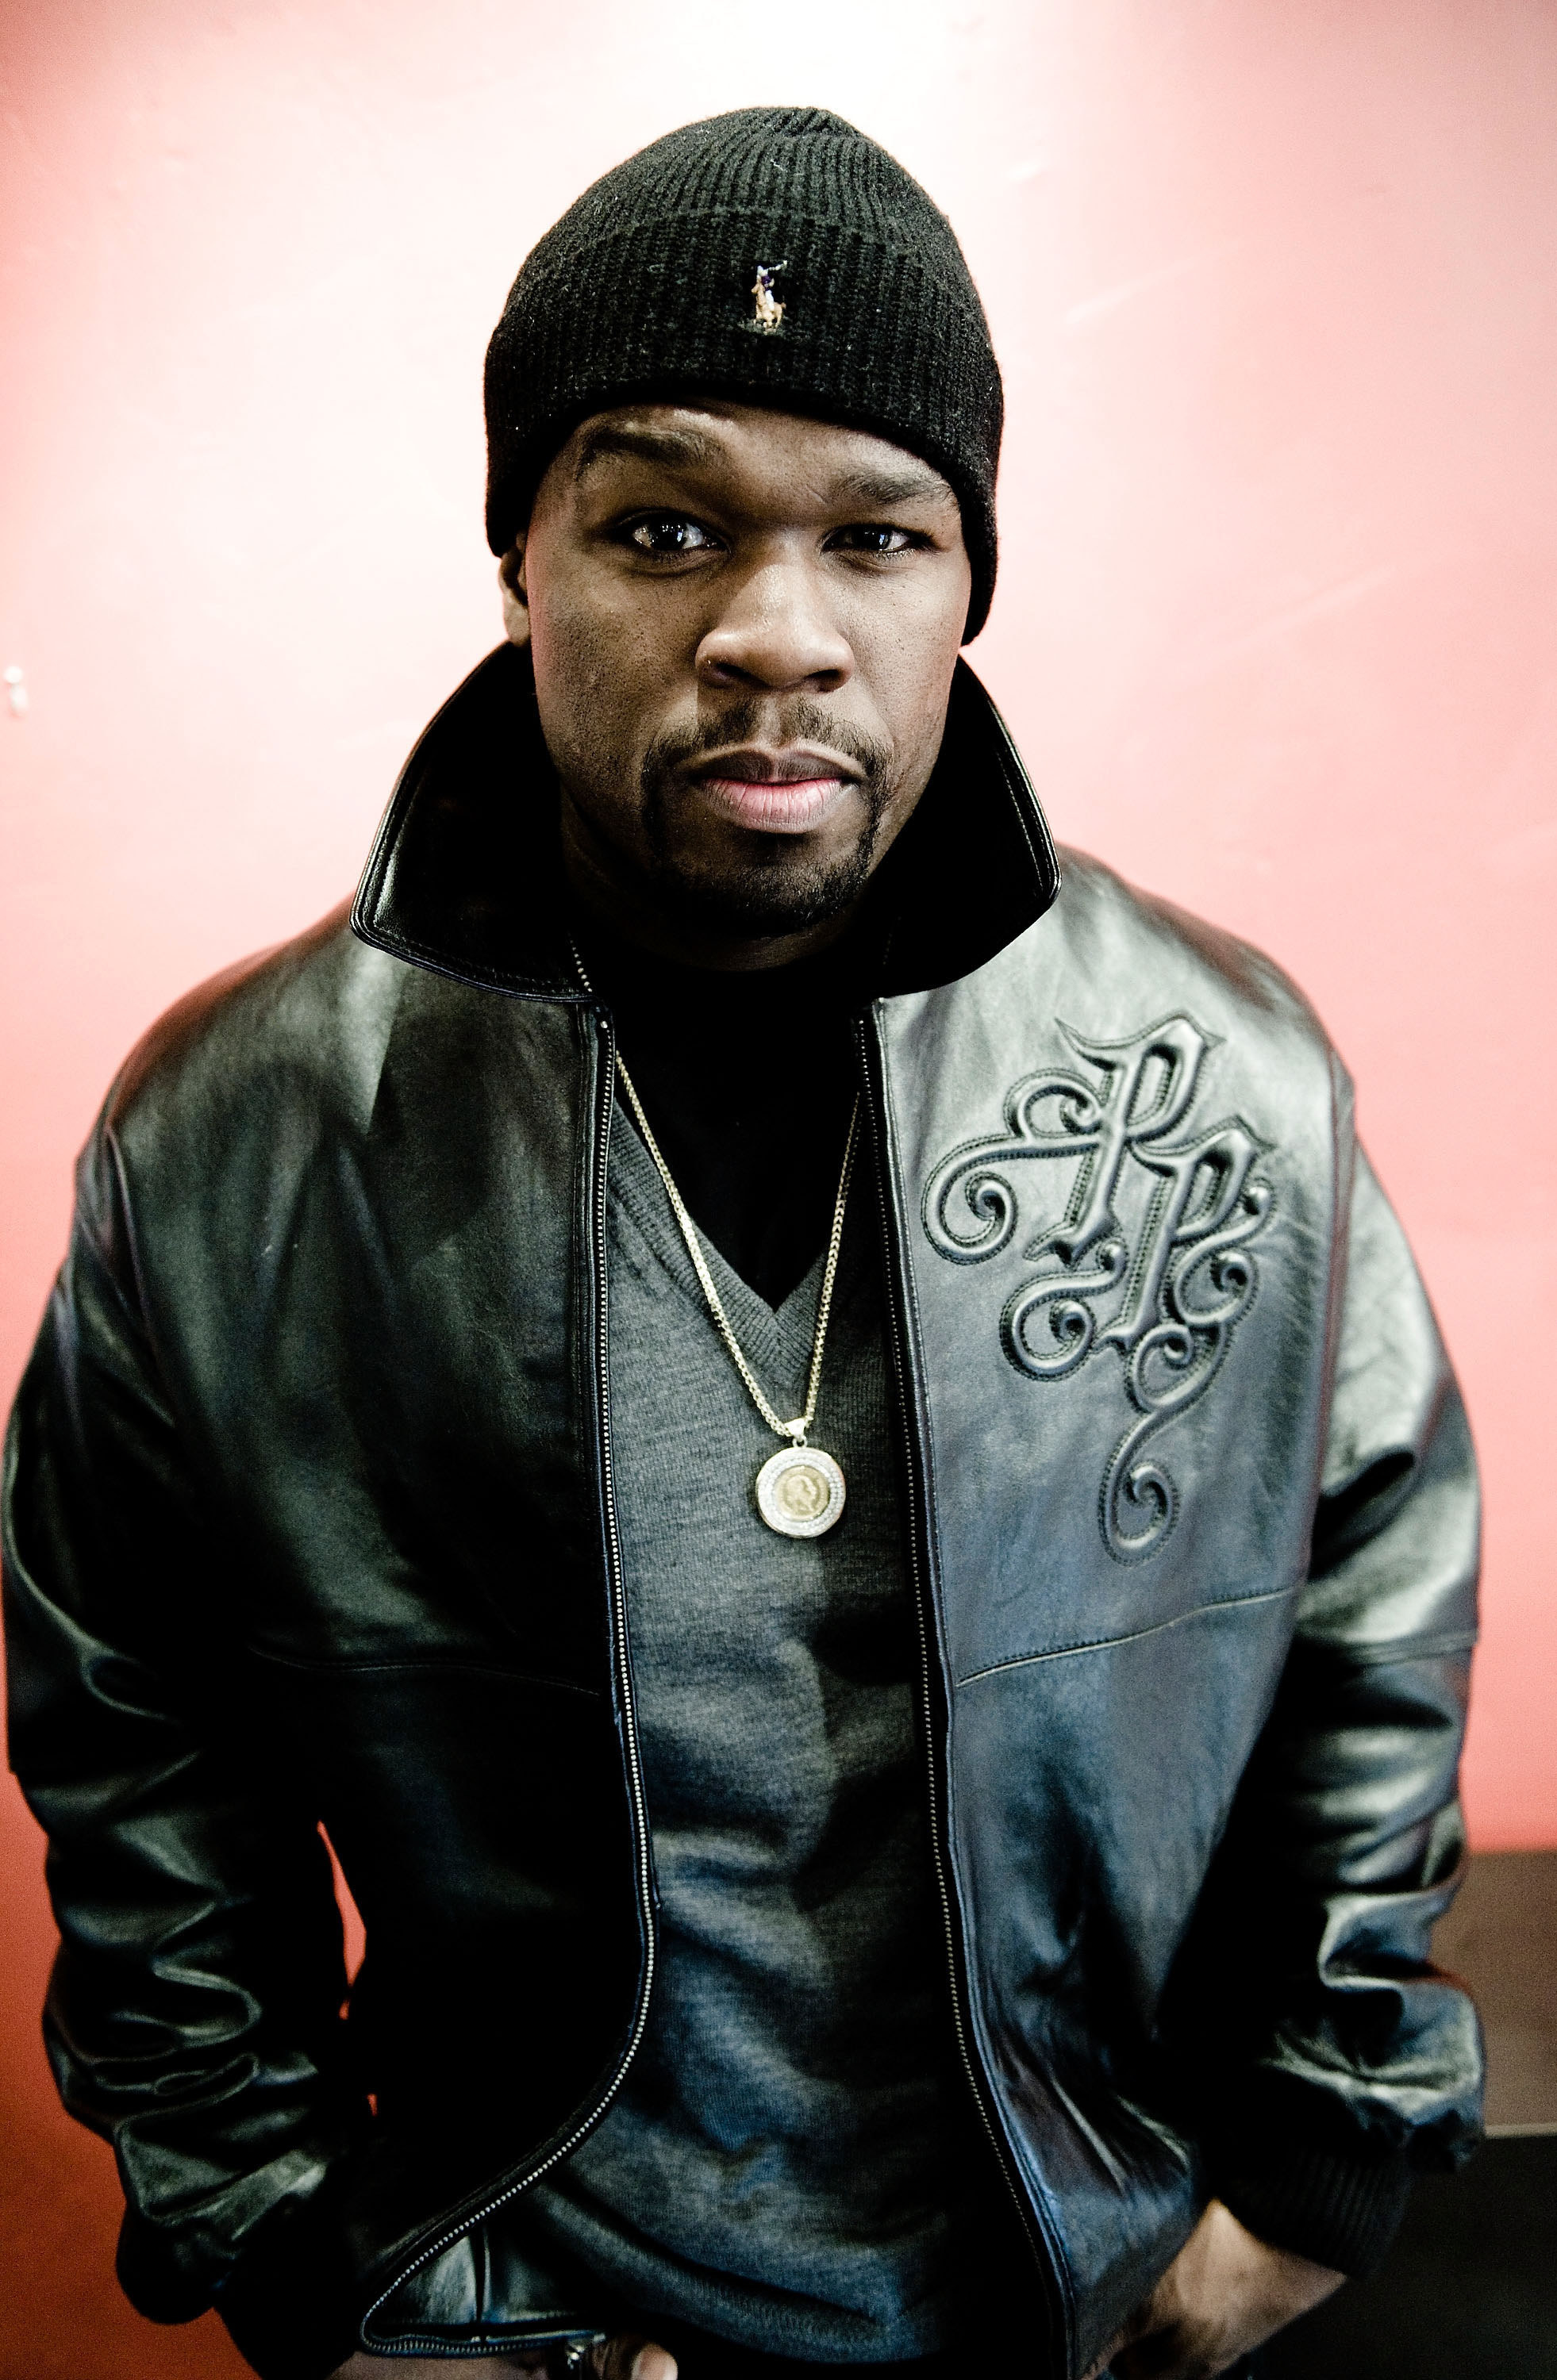 50 Cent attends a portrait session in Utah